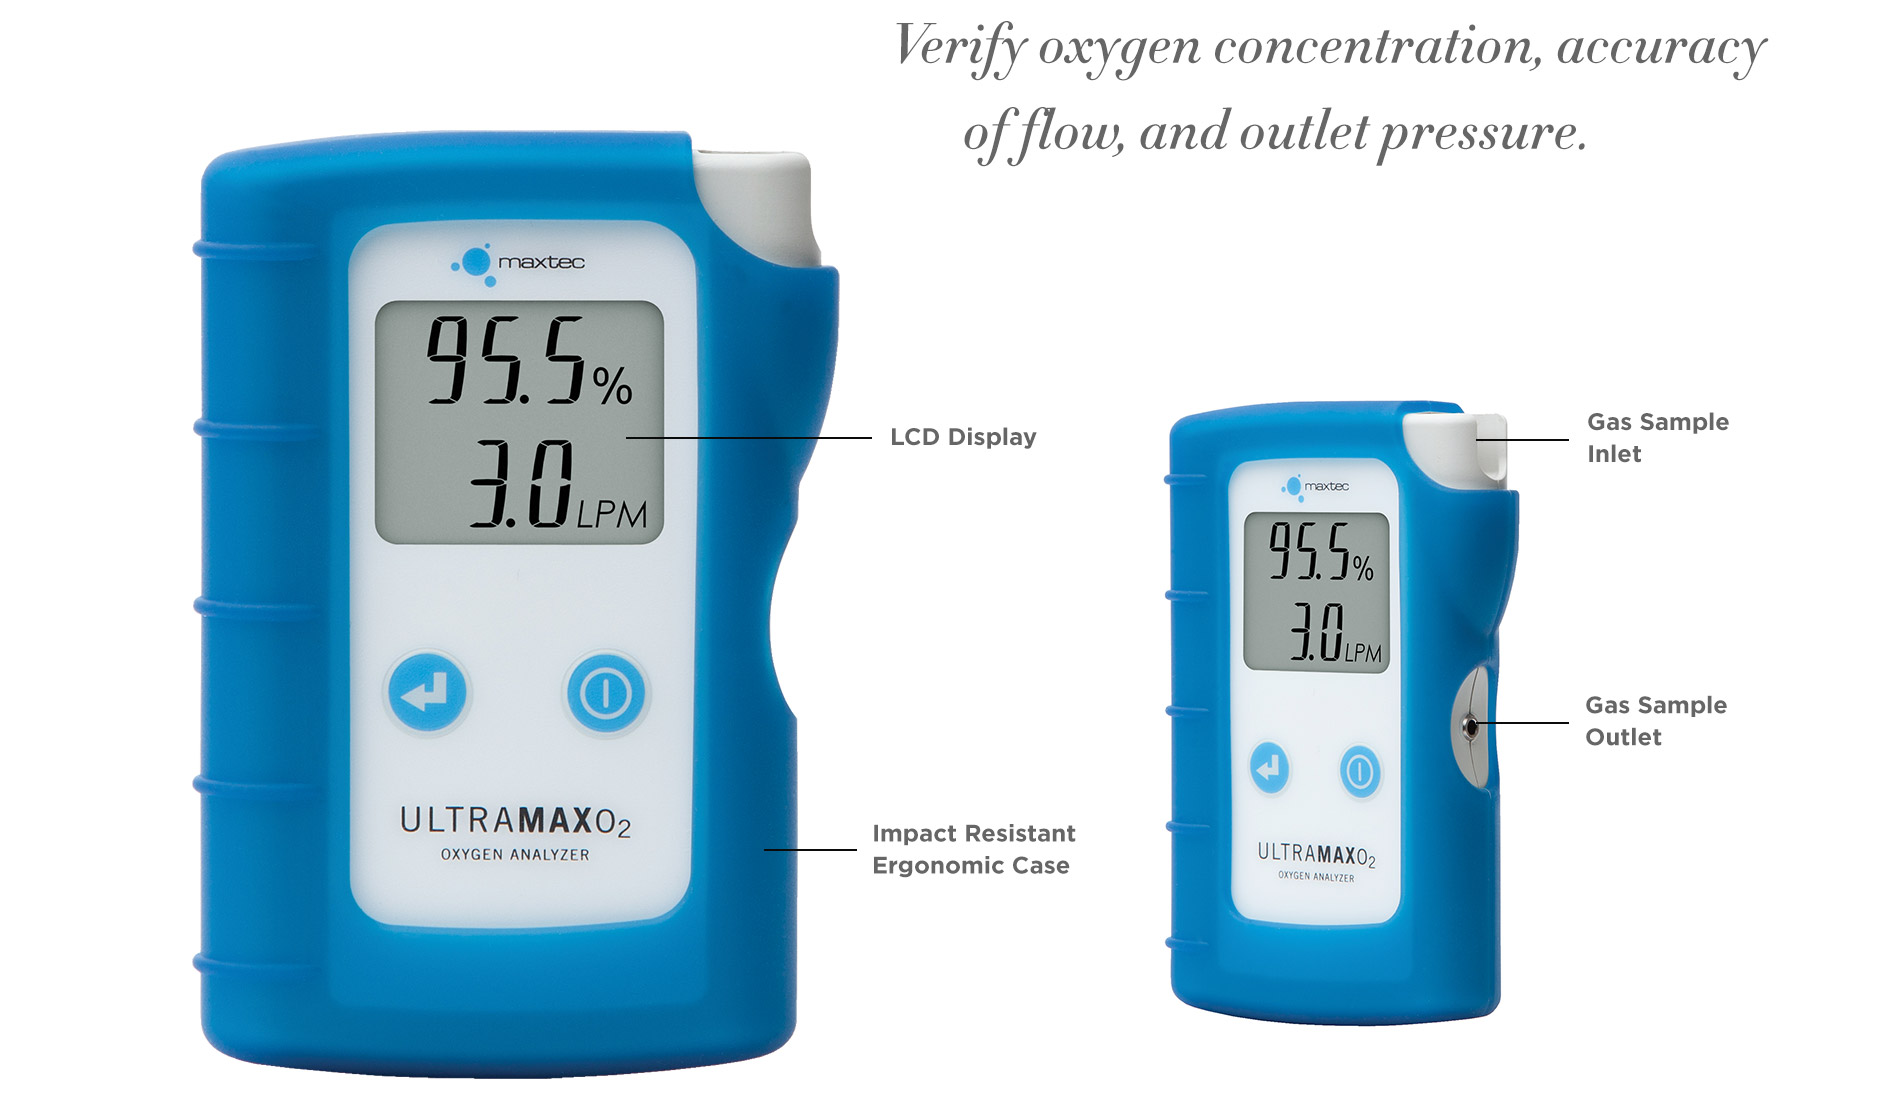 RES7000 Maxtec UltraMaxO2 Oxygen Analyzer. Verify oxygen concentration, accuracy of flow, and outlet pressure. LCD Display. Impact Resistant Ergonomic Case. Gas Sample Inlet. Gas Sample Outlet.